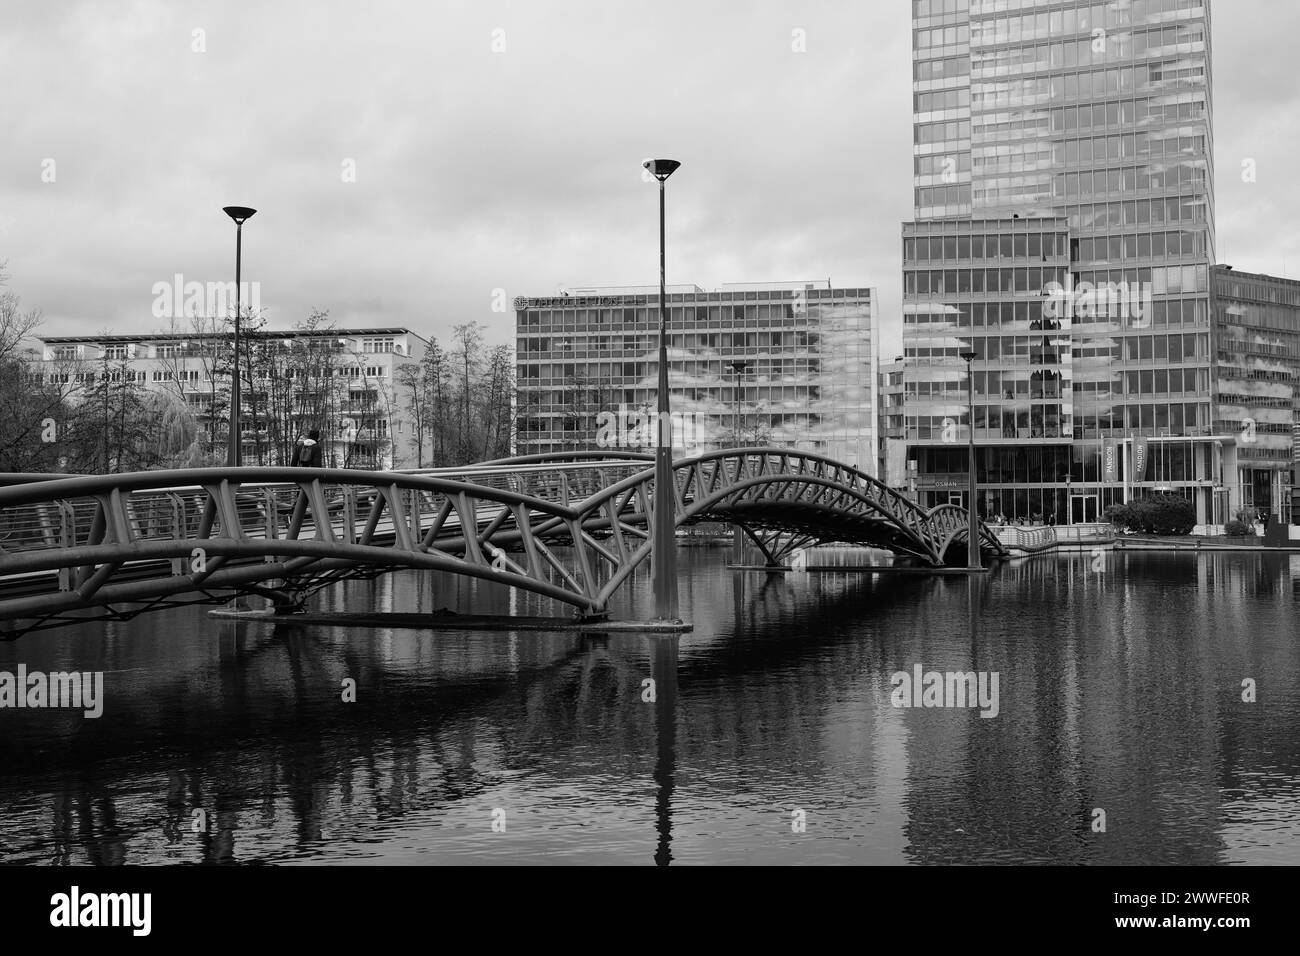 Building and bridge in the Mediapark, black and white, Cologne, Germany Stock Photo